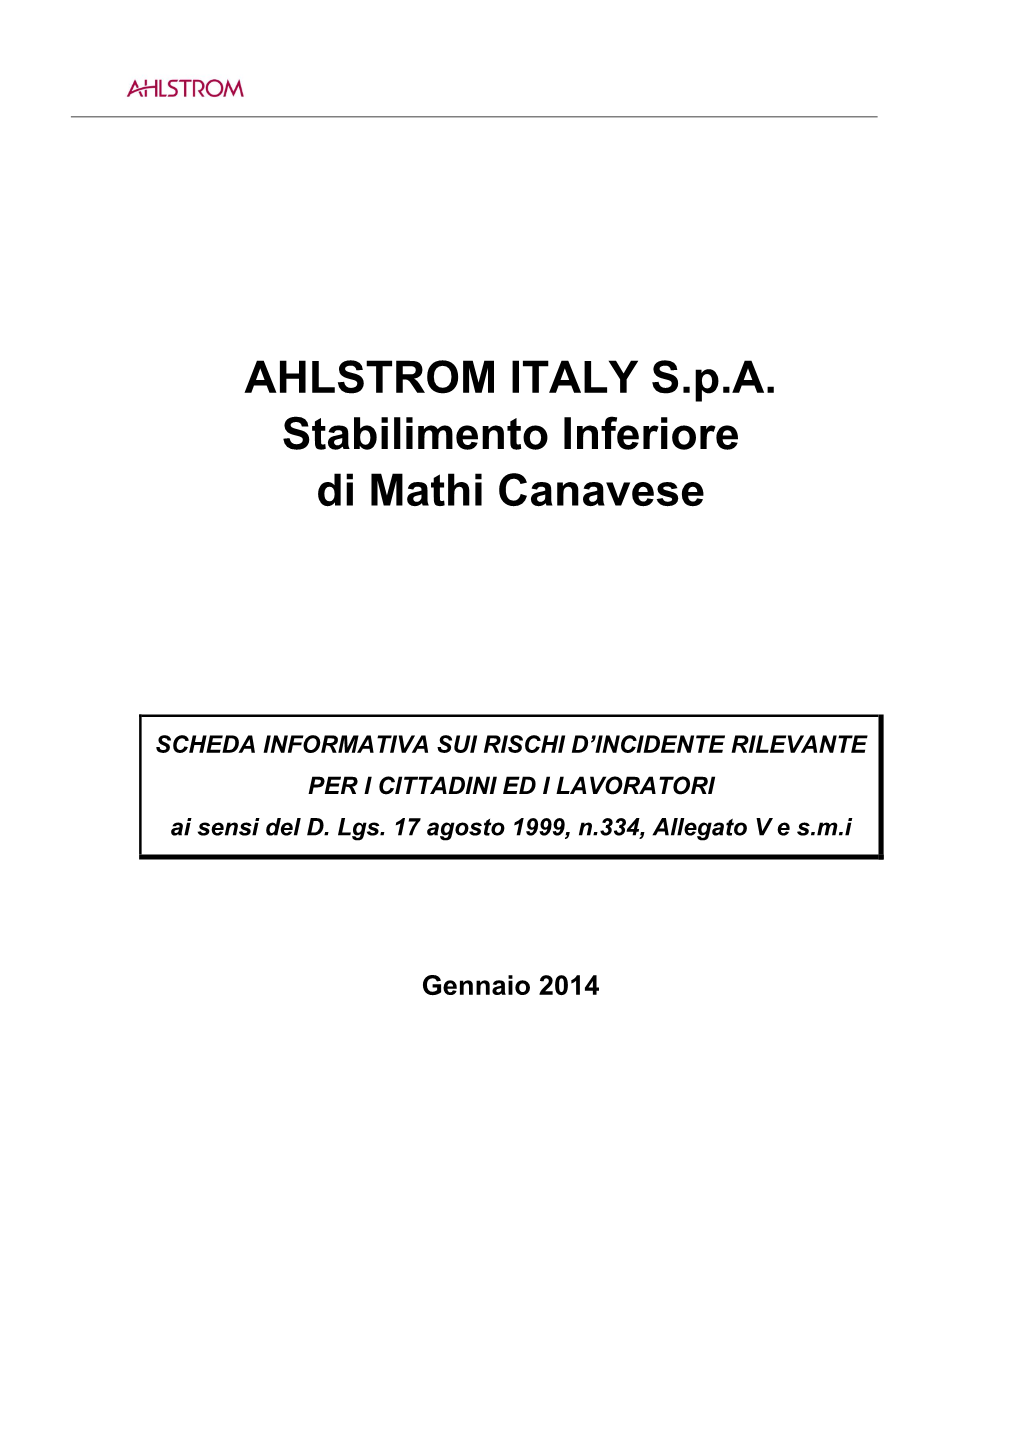 AHLSTROM ITALY Spa Stabilimento Inferiore Di Mathi Canavese